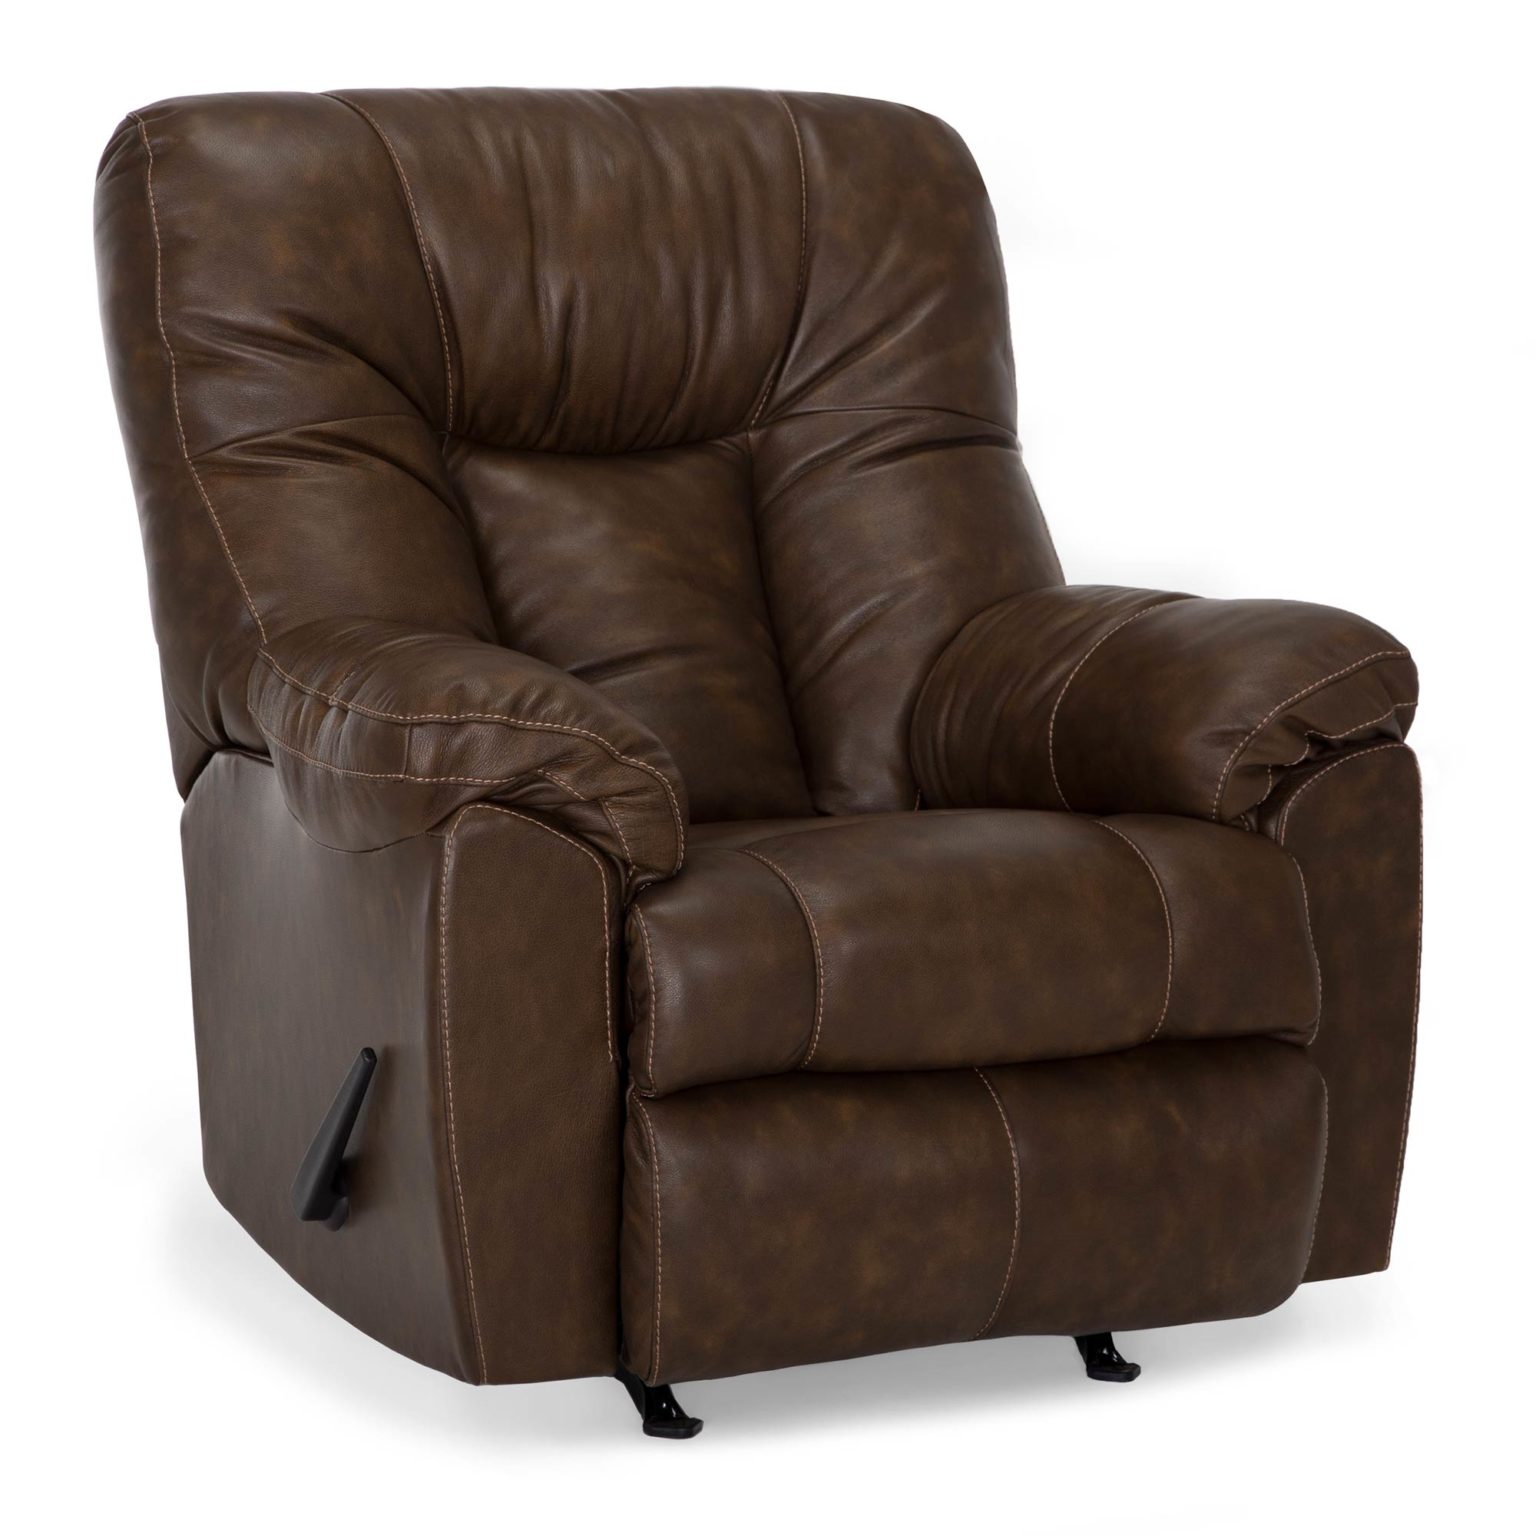 Franklin™ Connery Florence Almond Leather Recliner